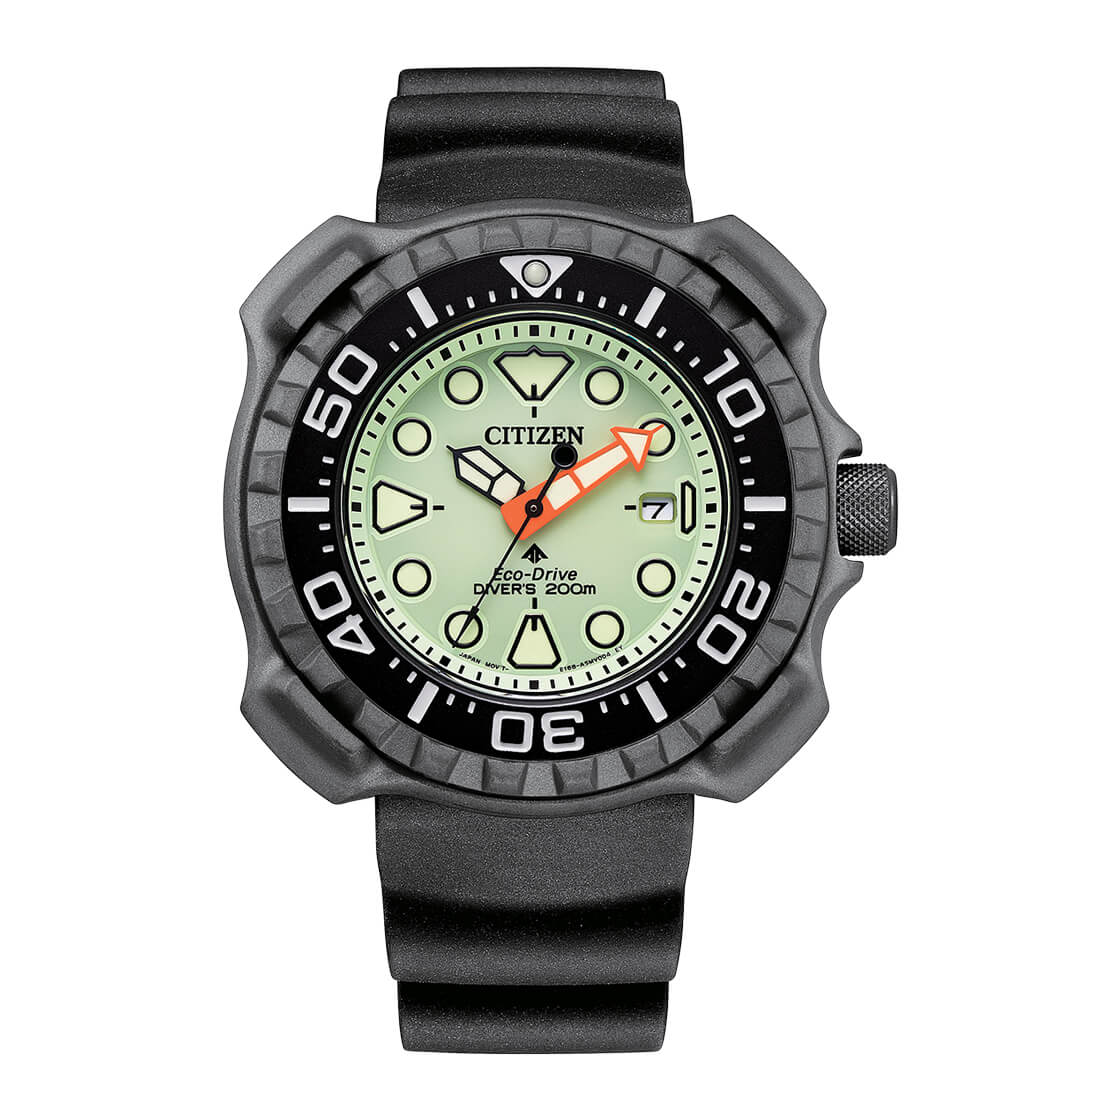 Citizen Men's Watch with Light Powered Movement and Green Dial - BN0227-17X